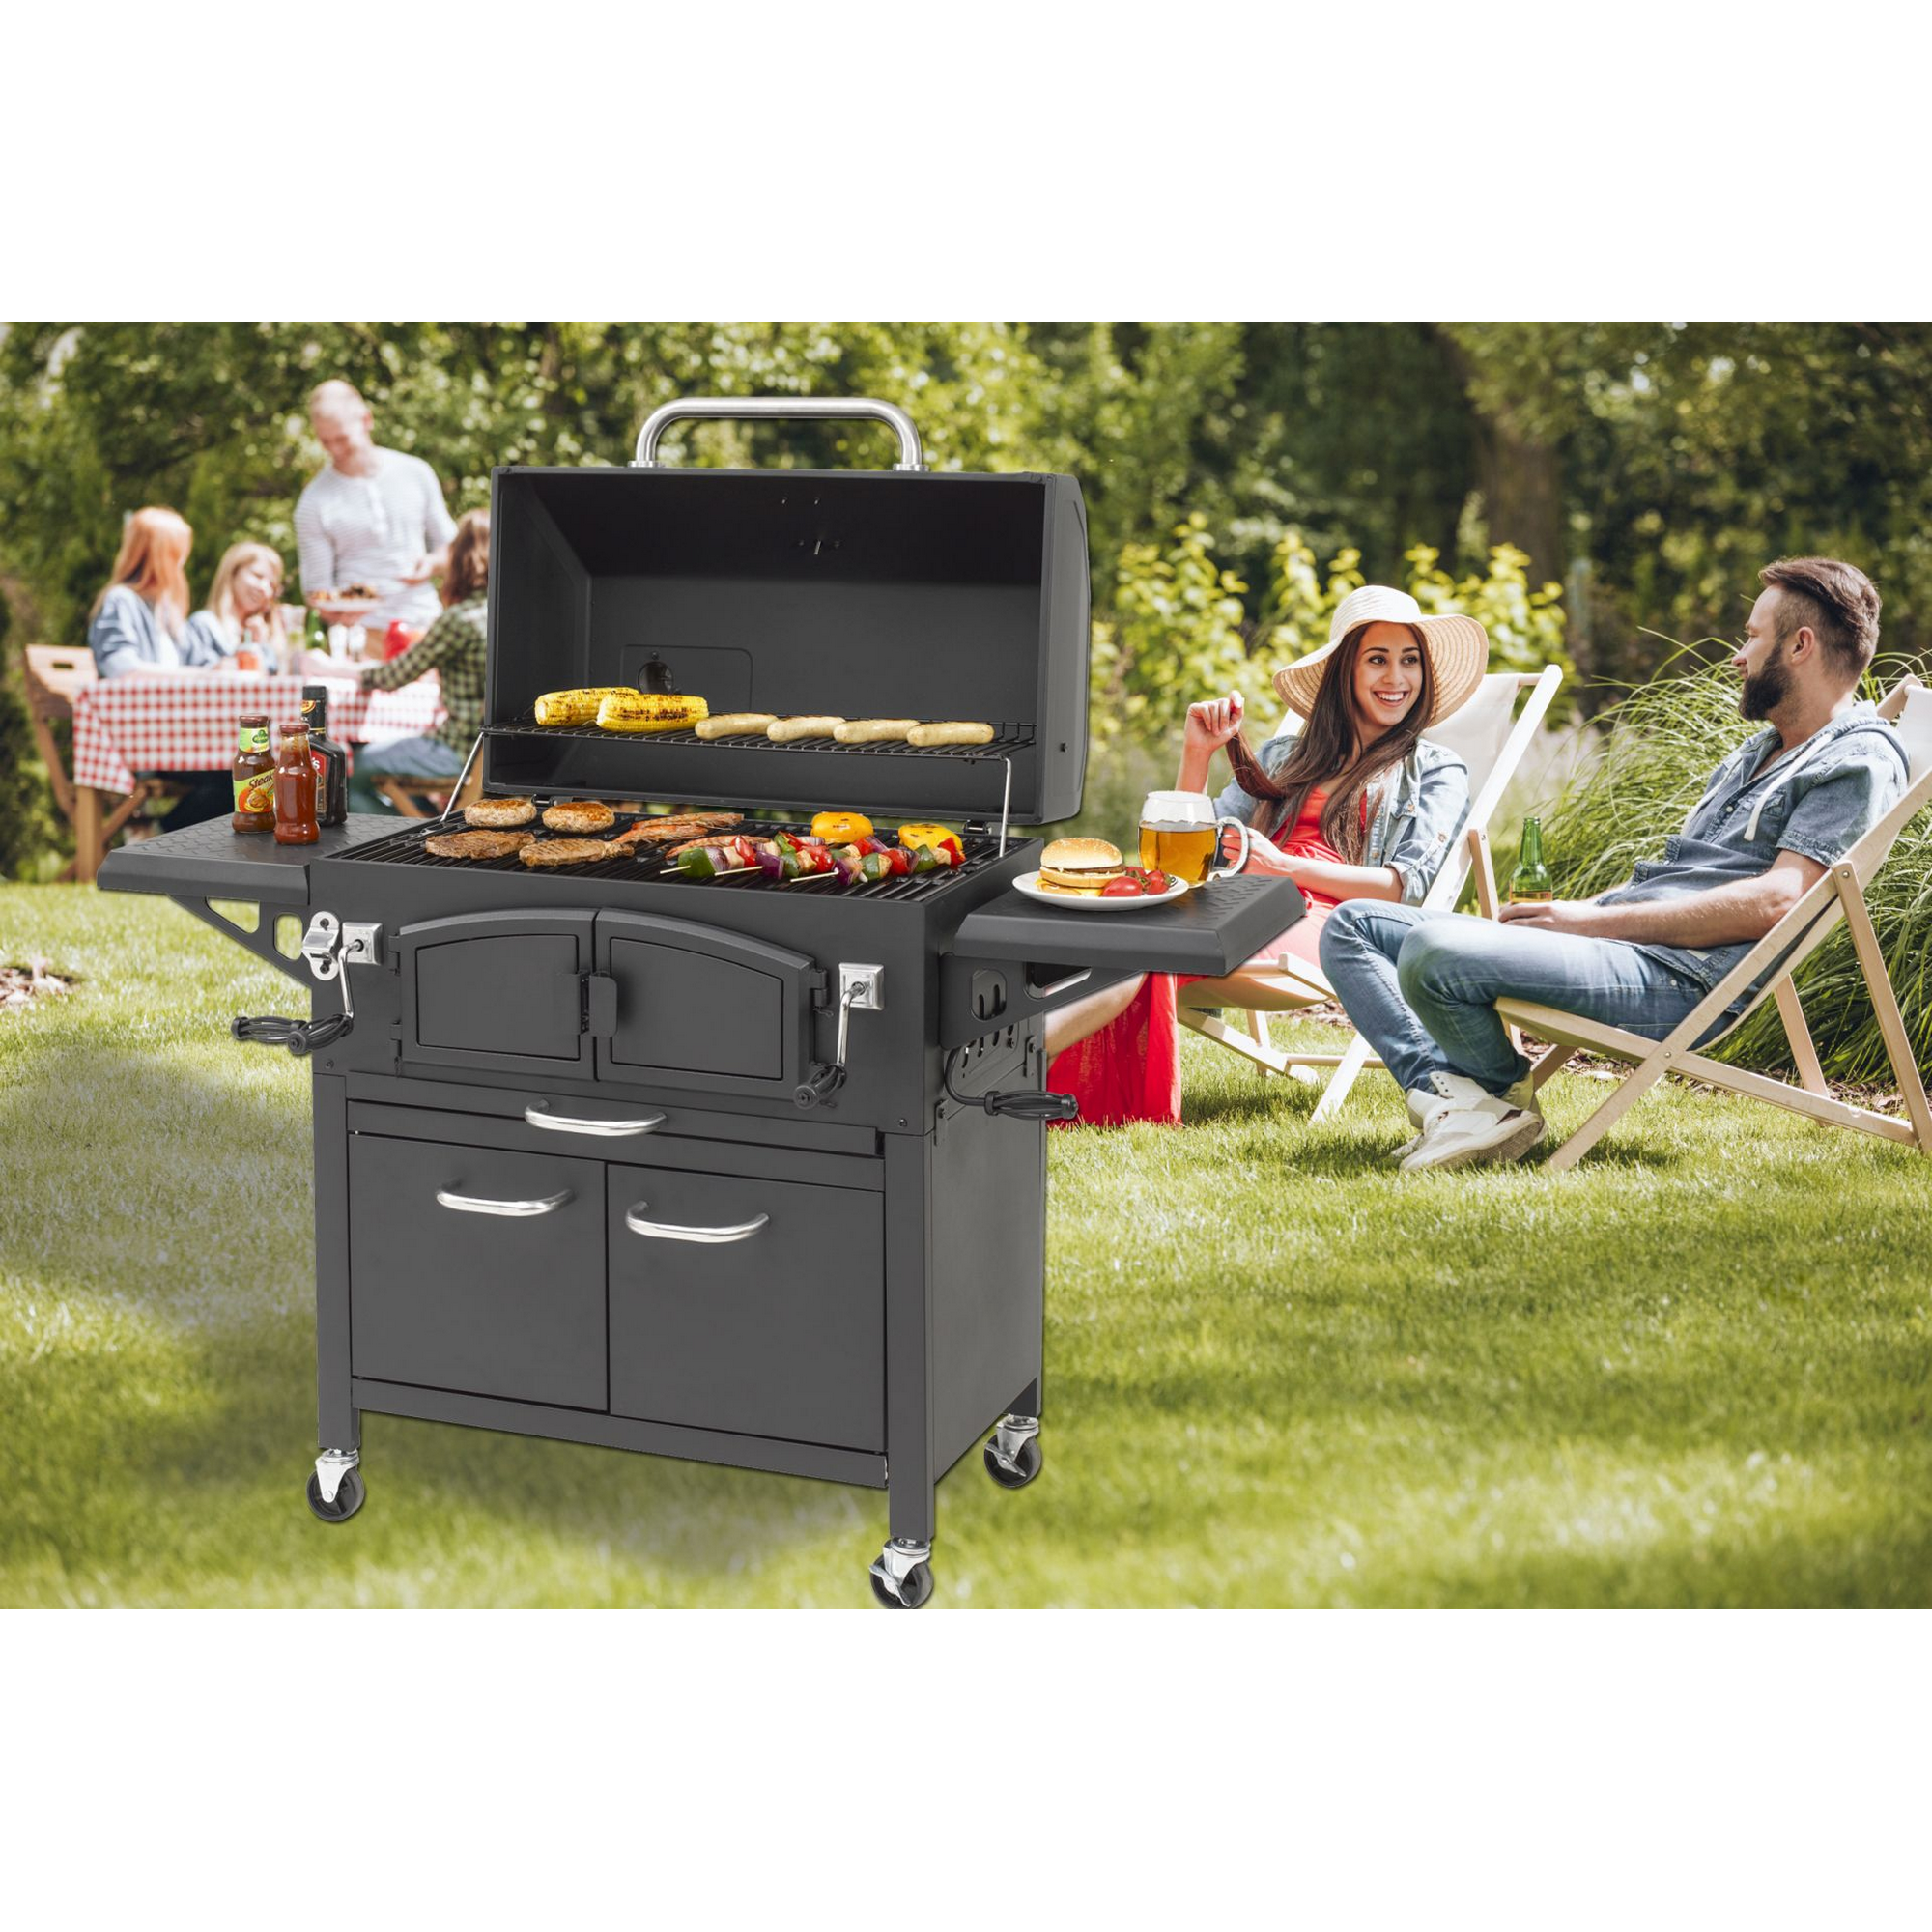 Holzkohlegrill 'Grand Ontario' schwarz 154 x 131 x 68,5 cm + product picture